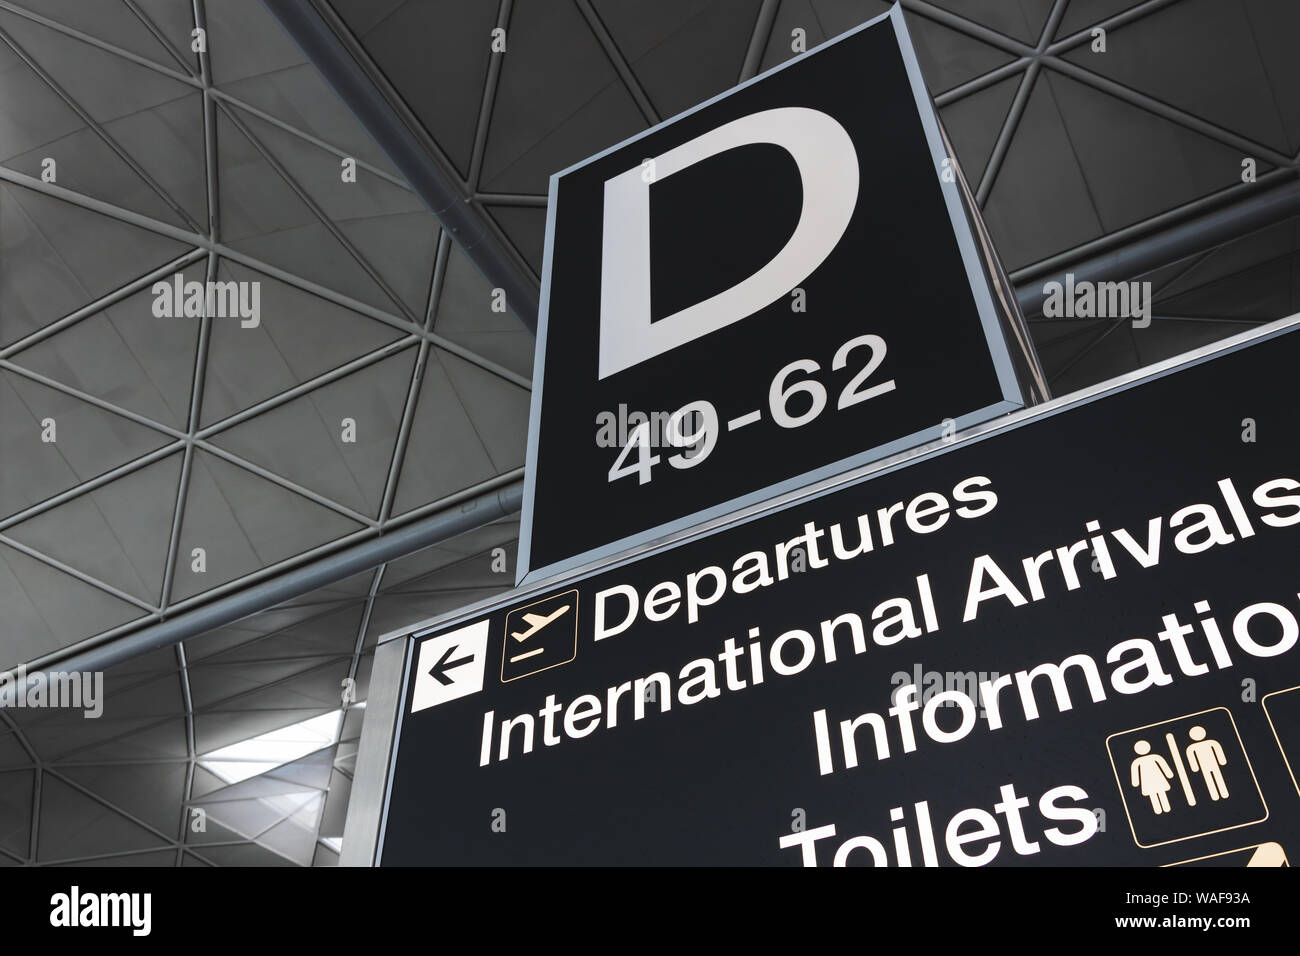 LONDON - AUGUST 7, 2019: Departures gate sign at modern airport terminal at London Stansted Stock Photo